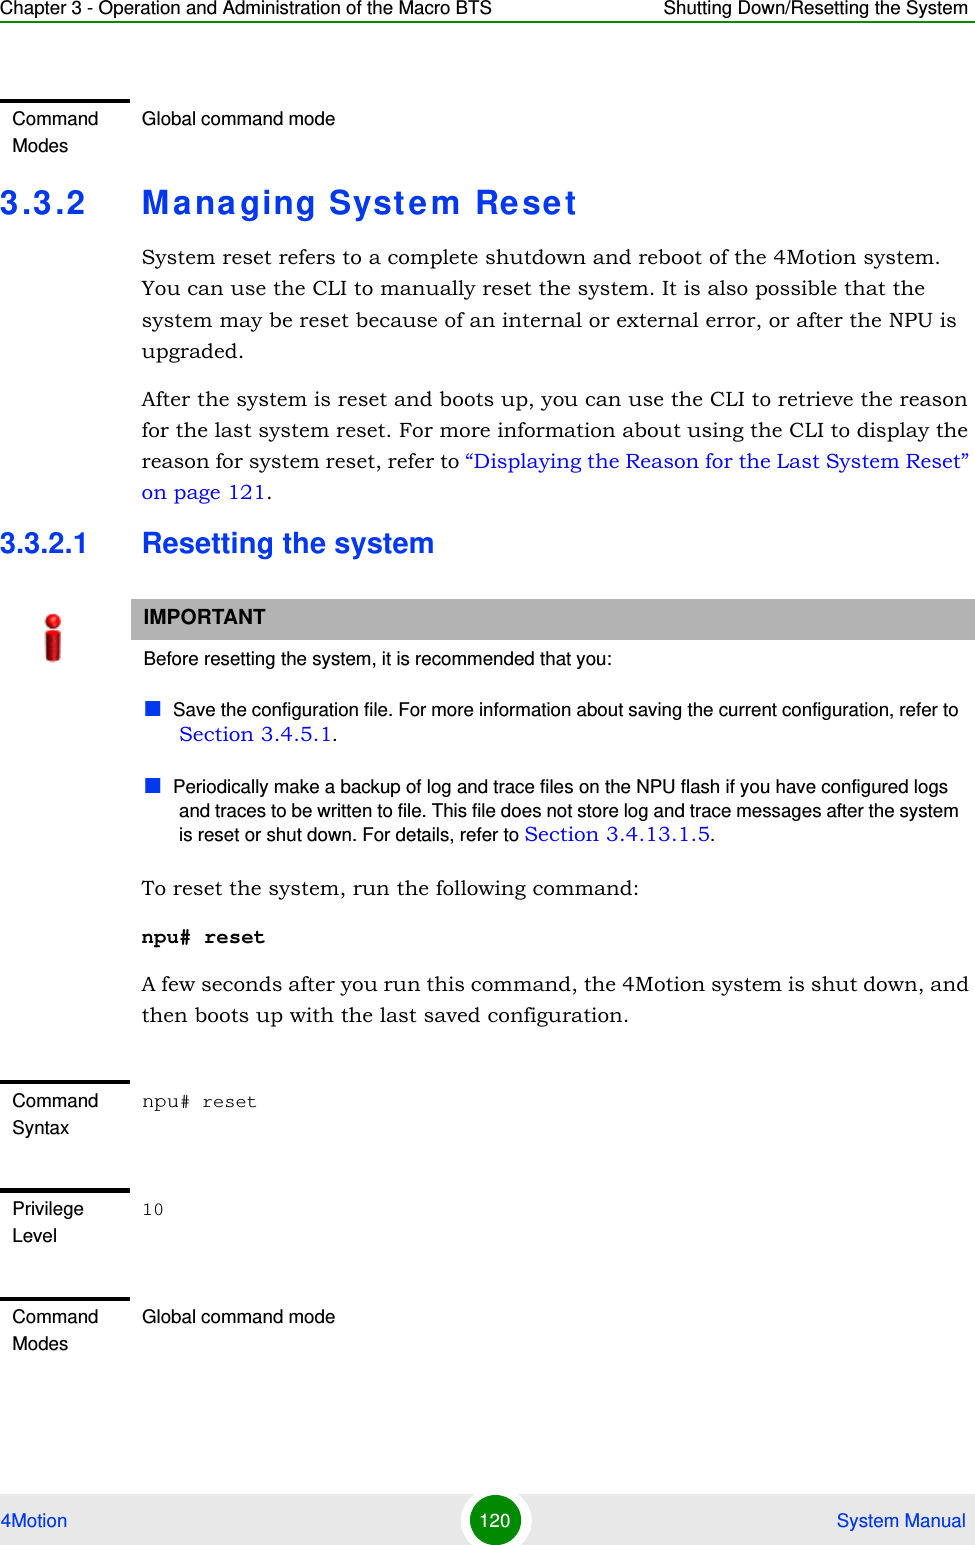 Chapter 3 - Operation and Administration of the Macro BTS Shutting Down/Resetting the System4Motion 120  System Manual3.3.2 Managing System ResetSystem reset refers to a complete shutdown and reboot of the 4Motion system. You can use the CLI to manually reset the system. It is also possible that the system may be reset because of an internal or external error, or after the NPU is upgraded. After the system is reset and boots up, you can use the CLI to retrieve the reason for the last system reset. For more information about using the CLI to display the reason for system reset, refer to “Displaying the Reason for the Last System Reset” on page 121.3.3.2.1 Resetting the systemTo reset the system, run the following command:npu# resetA few seconds after you run this command, the 4Motion system is shut down, and then boots up with the last saved configuration. Command ModesGlobal command modeIMPORTANTBefore resetting the system, it is recommended that you:Save the configuration file. For more information about saving the current configuration, refer to Section 3.4.5.1. Periodically make a backup of log and trace files on the NPU flash if you have configured logs and traces to be written to file. This file does not store log and trace messages after the system is reset or shut down. For details, refer to Section 3.4.13.1.5.Command Syntaxnpu# resetPrivilege Level10Command ModesGlobal command mode